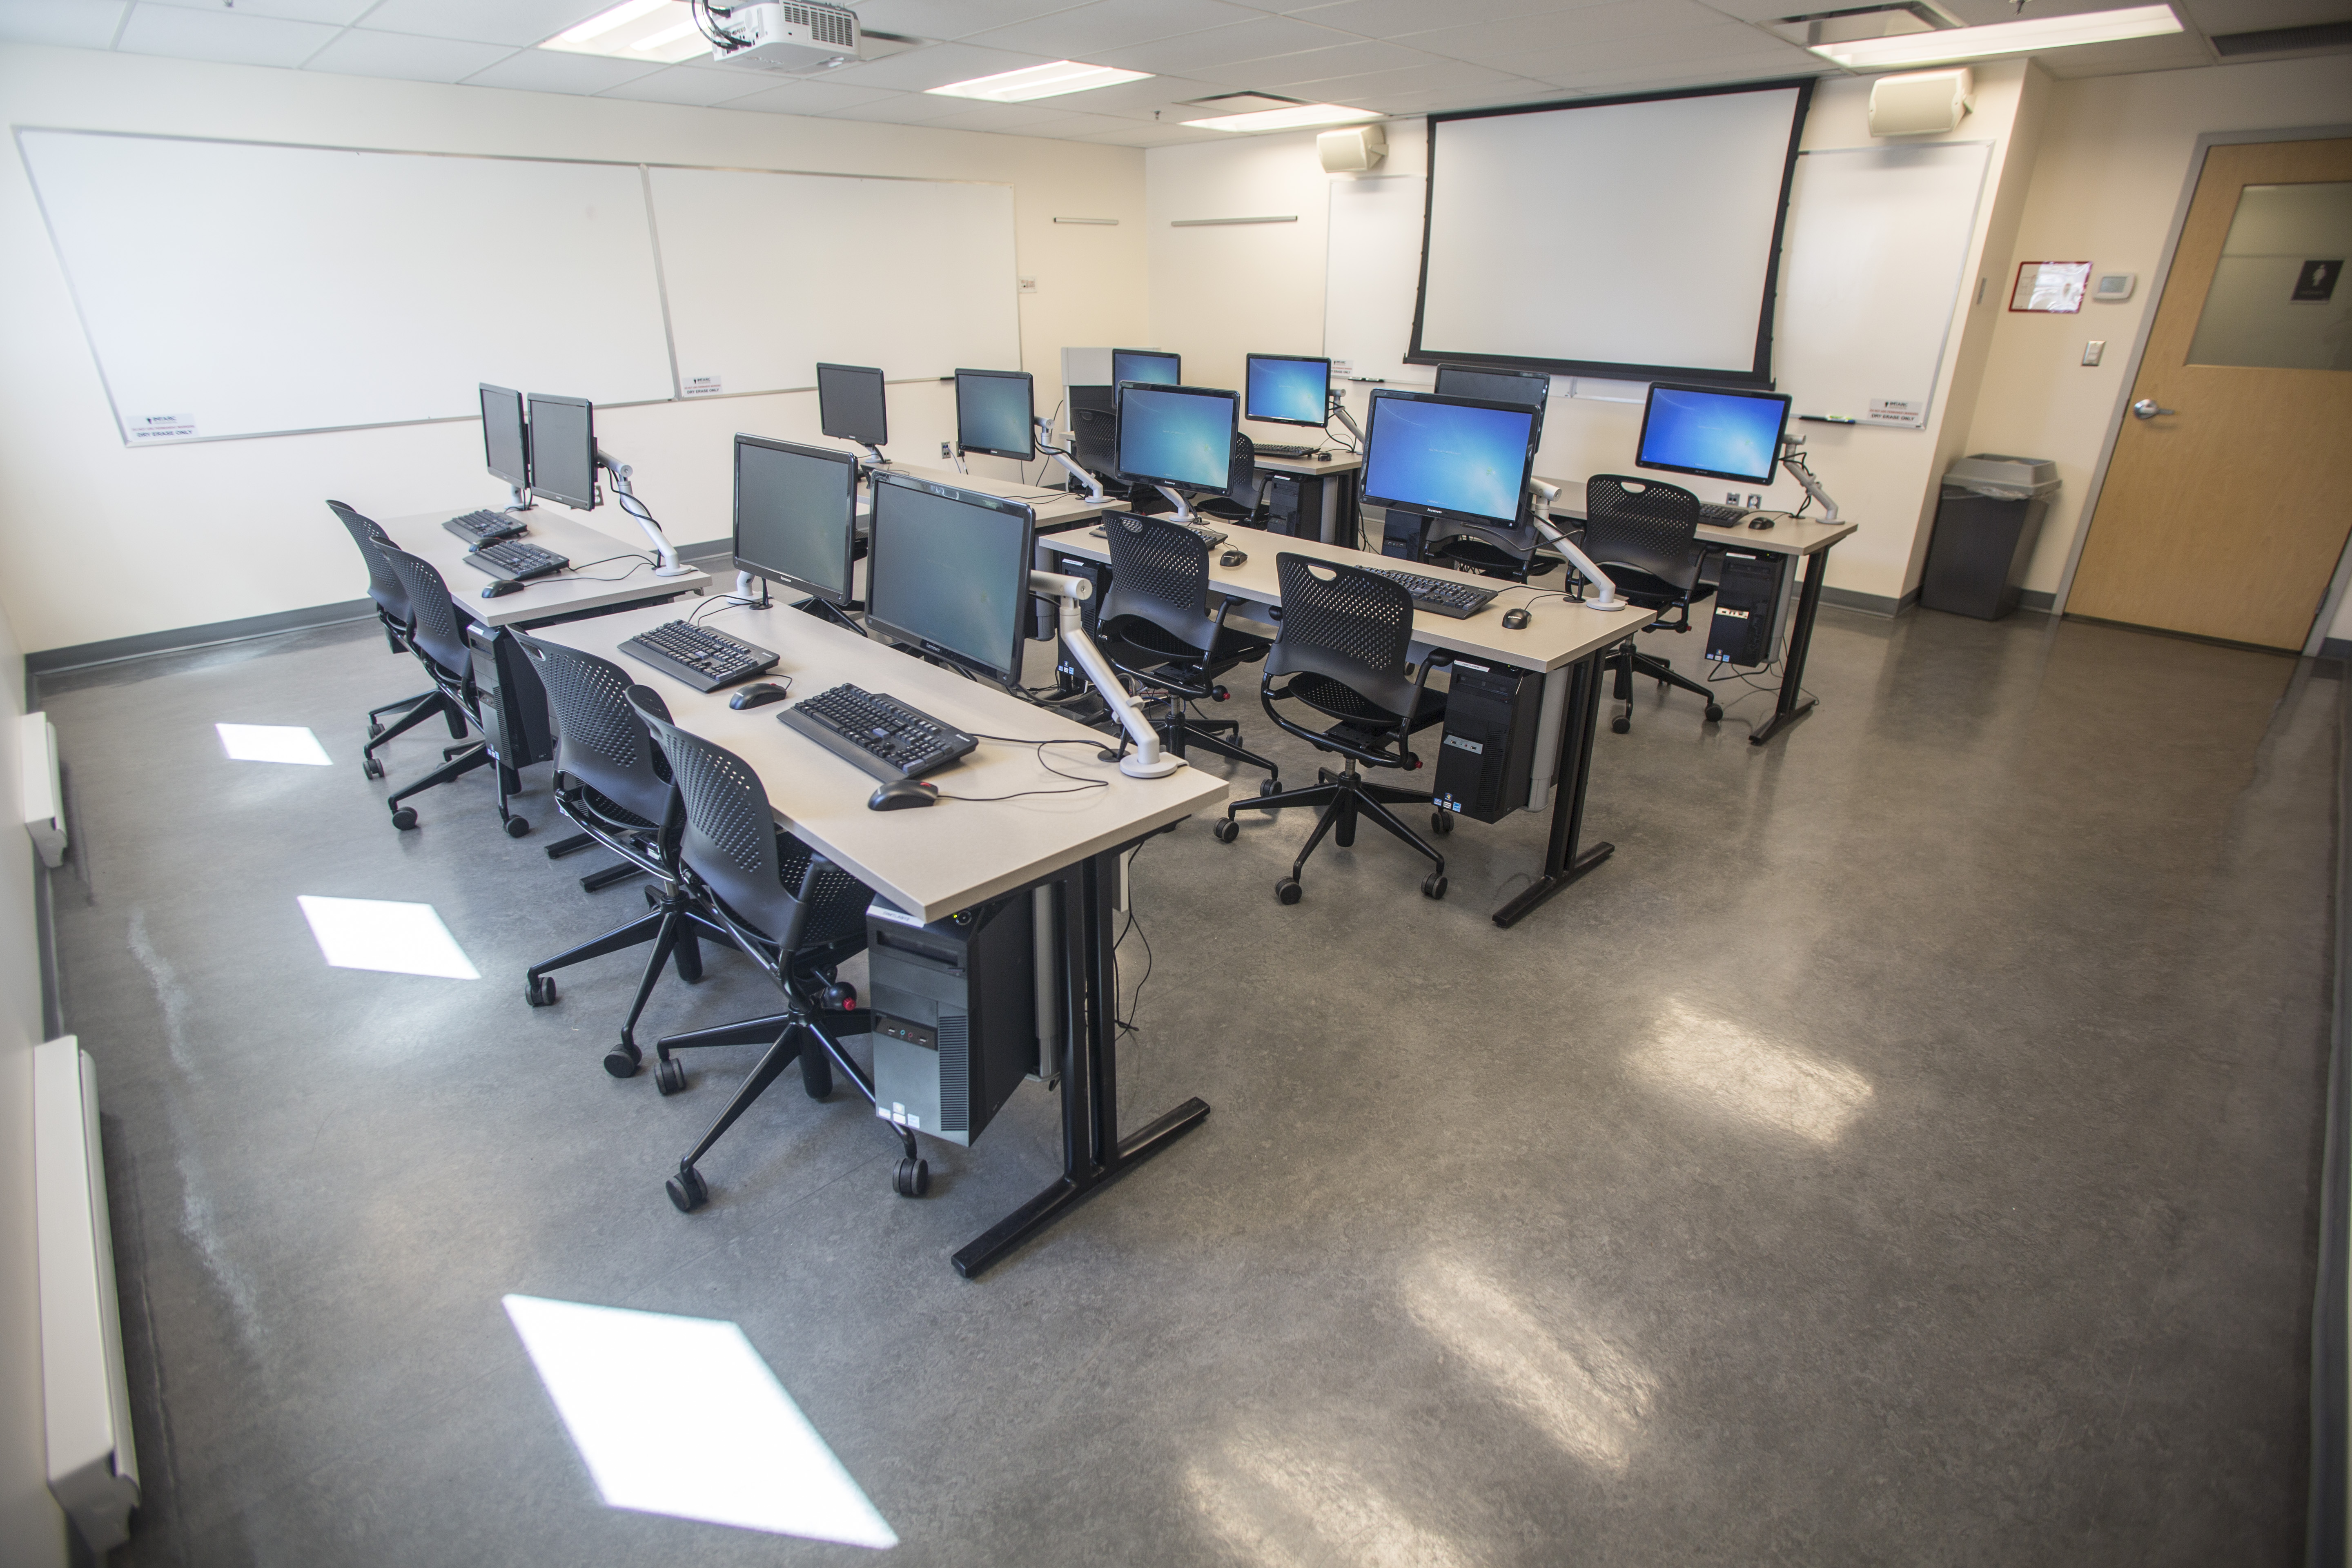 Computer room where keyboard assessments take place